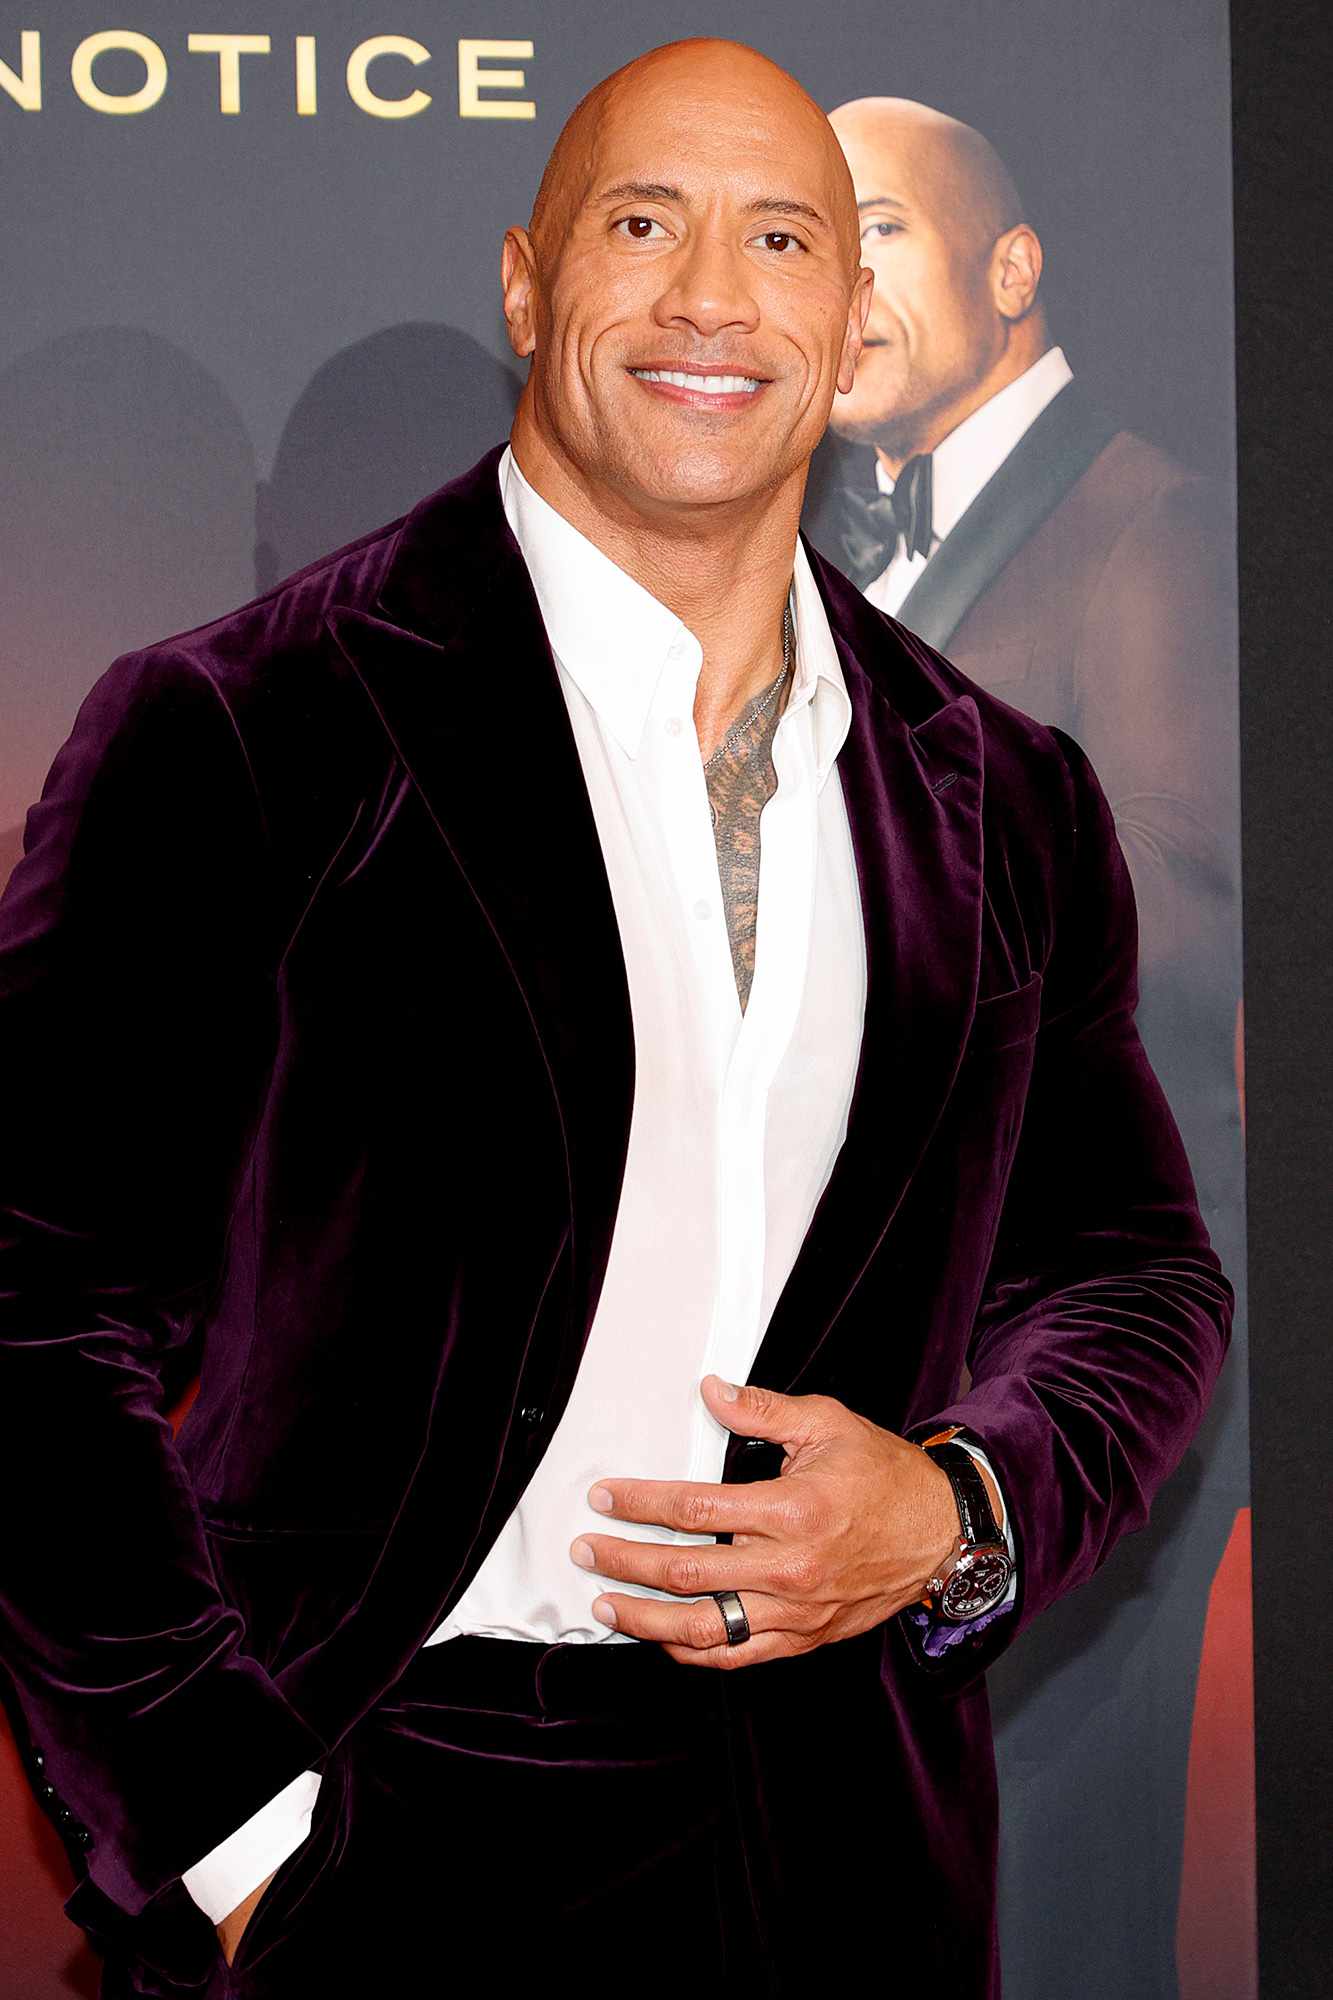 LOS ANGELES, CALIFORNIA - NOVEMBER 03: Dwayne Johnson attends the World Premiere Of Netflix's "Red Notice" at L.A. LIVE on November 03, 2021 in Los Angeles, California. (Photo by Amy Sussman/Getty Images)